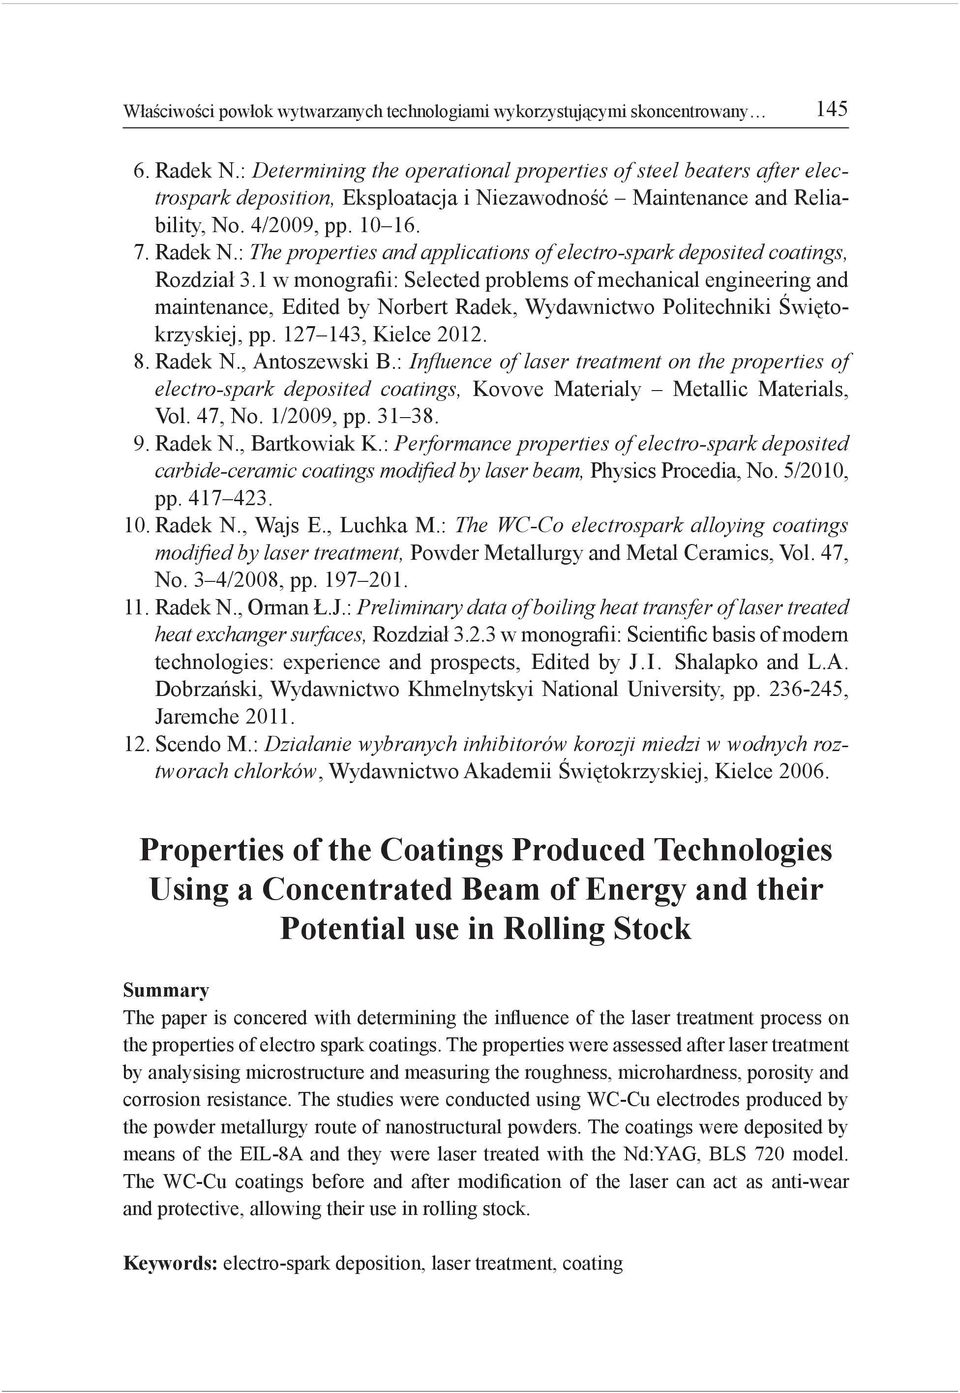 : The properties and applications of electro-spark deposited coatings, Rozdział 3.